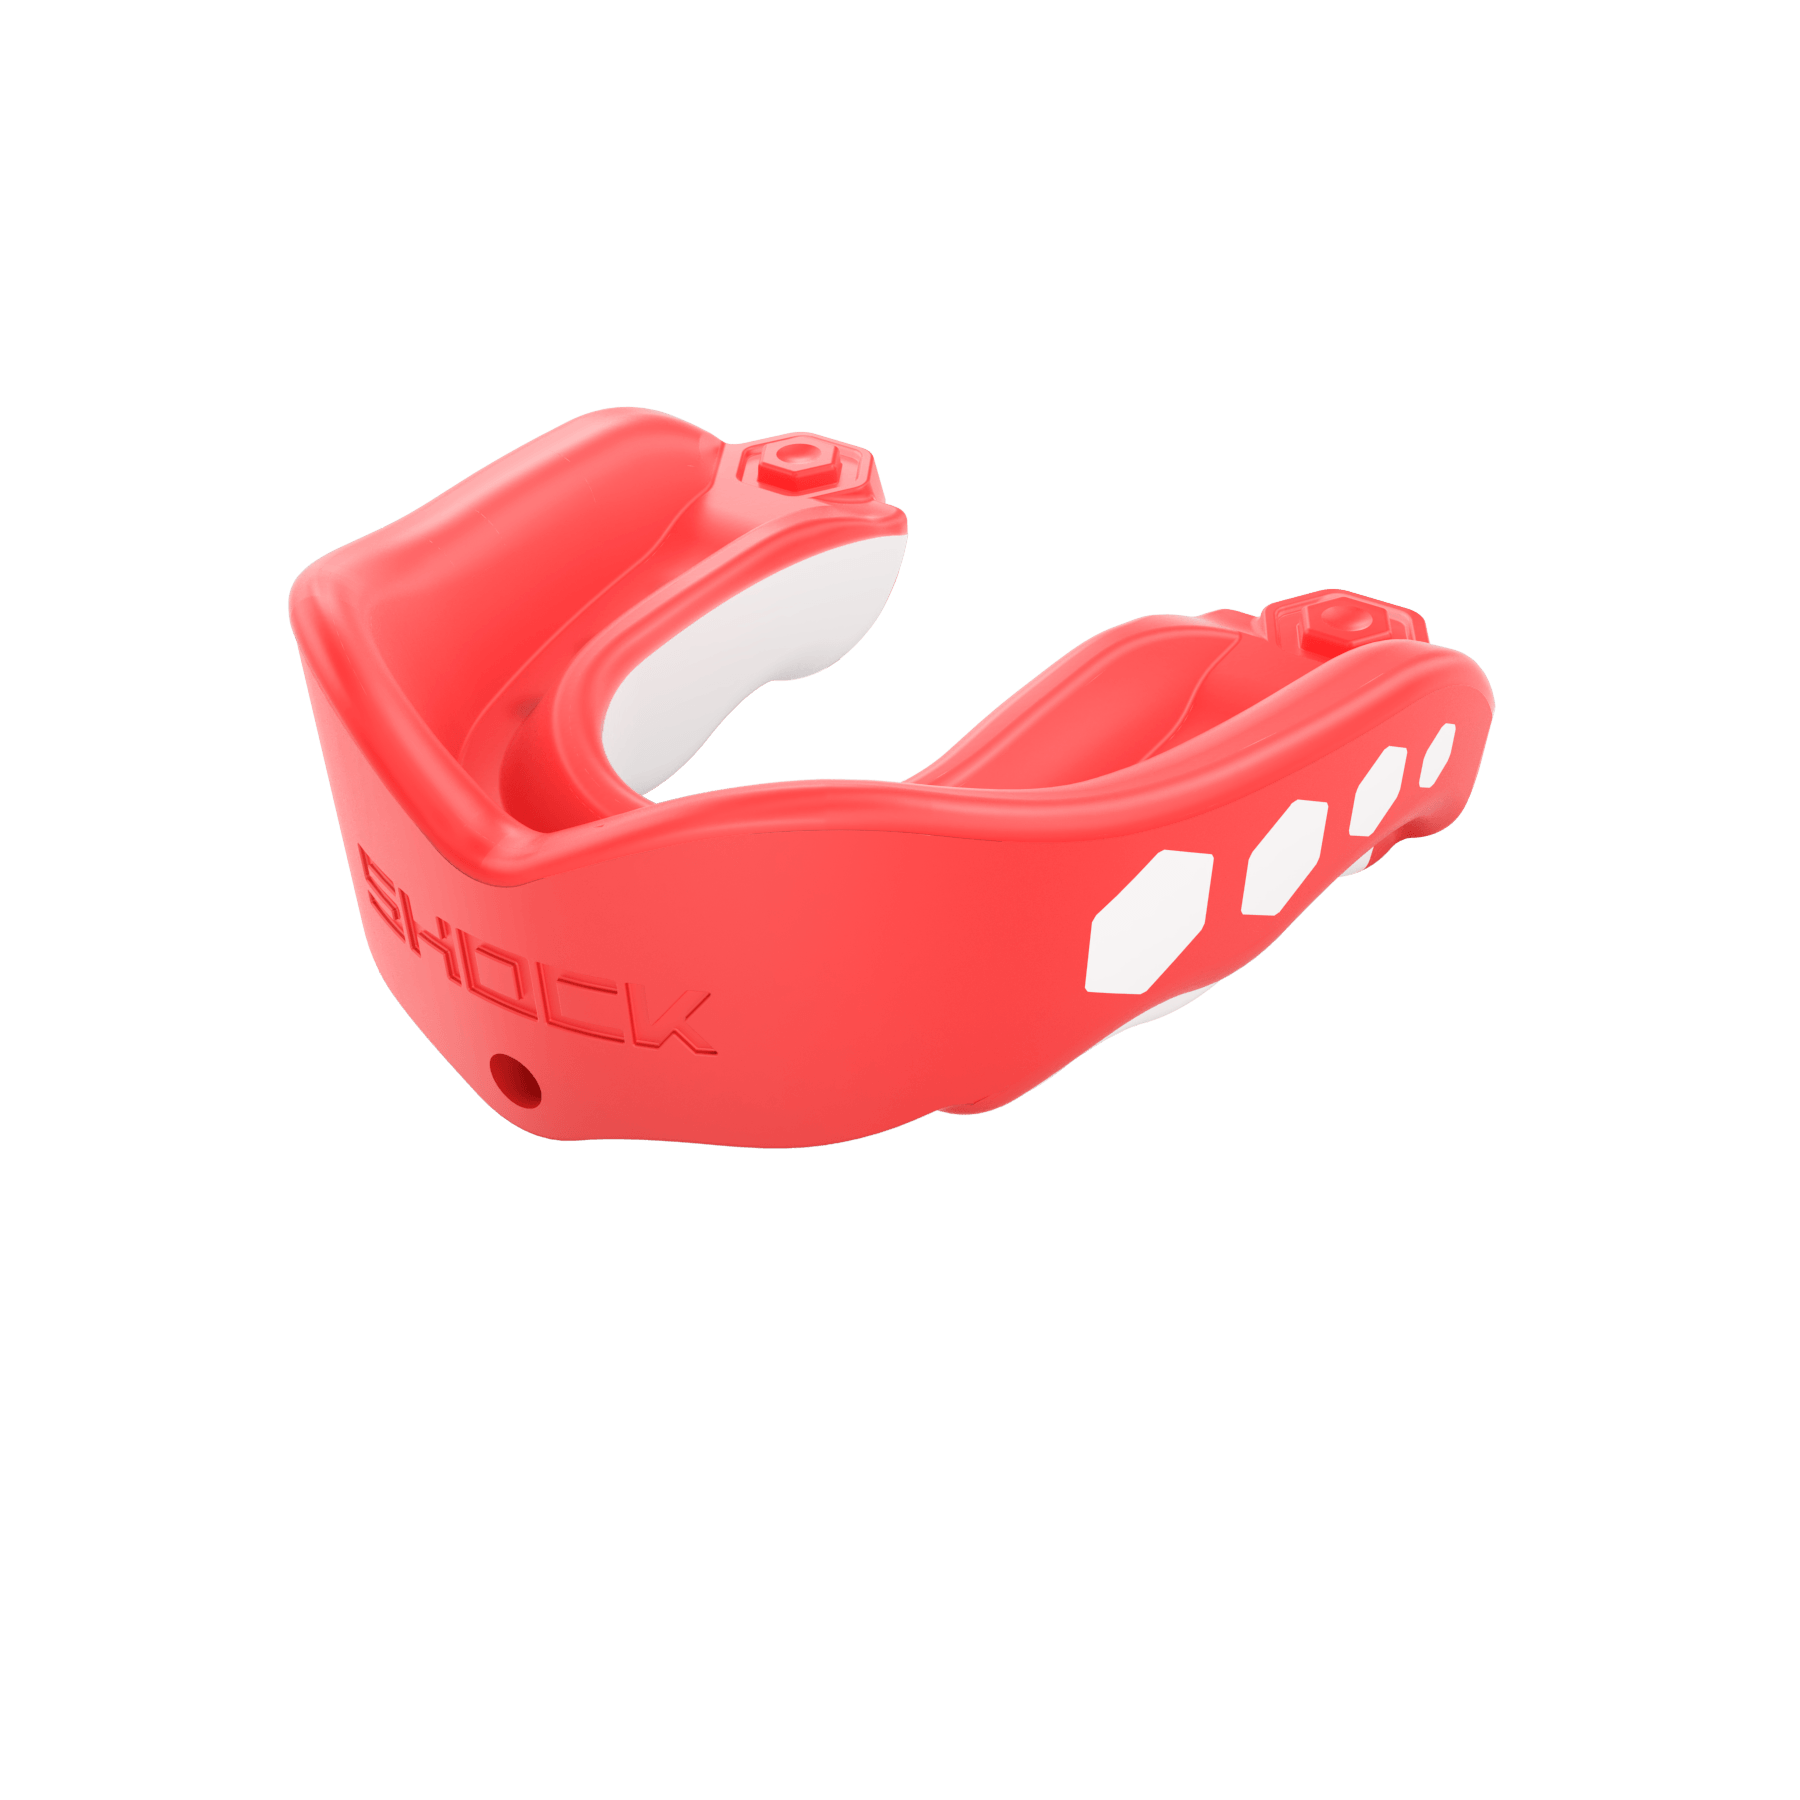 Shock Doctor Gel Max Flavor Fusion Mouthguard - Fruit Punch Flavor - Front View